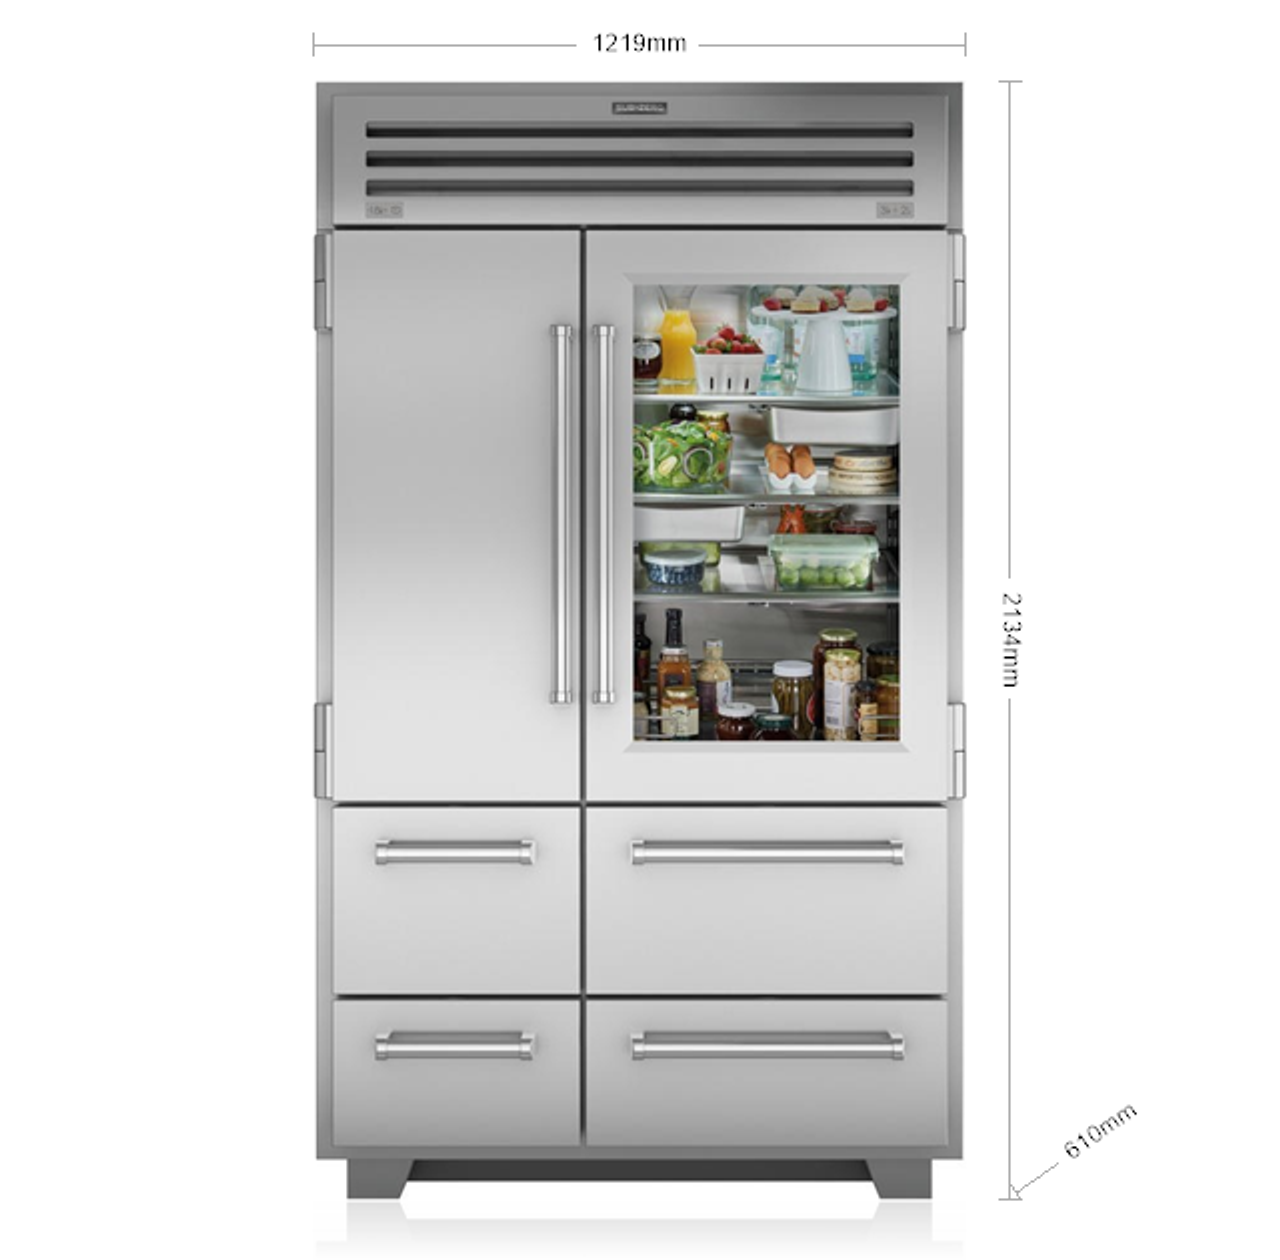 ICBPRO4850G - 937L Built-In PRO Side By Side 6 Door Multi Drawer Glass Door Refrigerator with Internal Ice-Maker - Stainless Steel